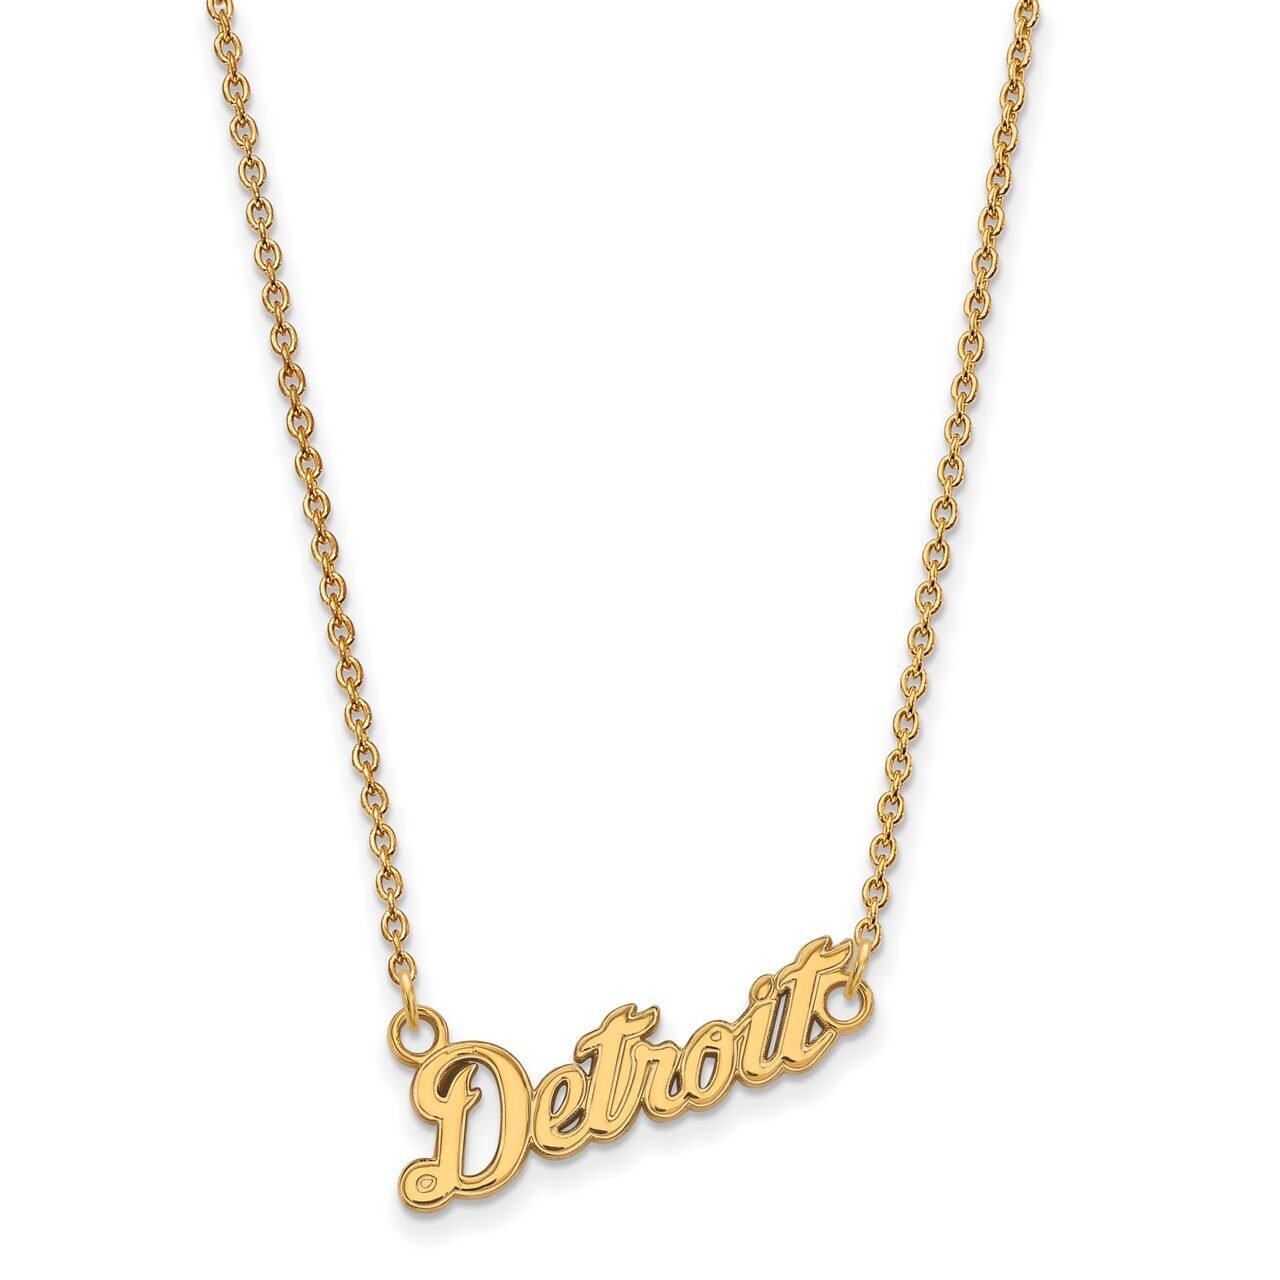 Detroit Tigers Small Pendant with Chain Necklace Gold-plated Silver GP061TIG-18